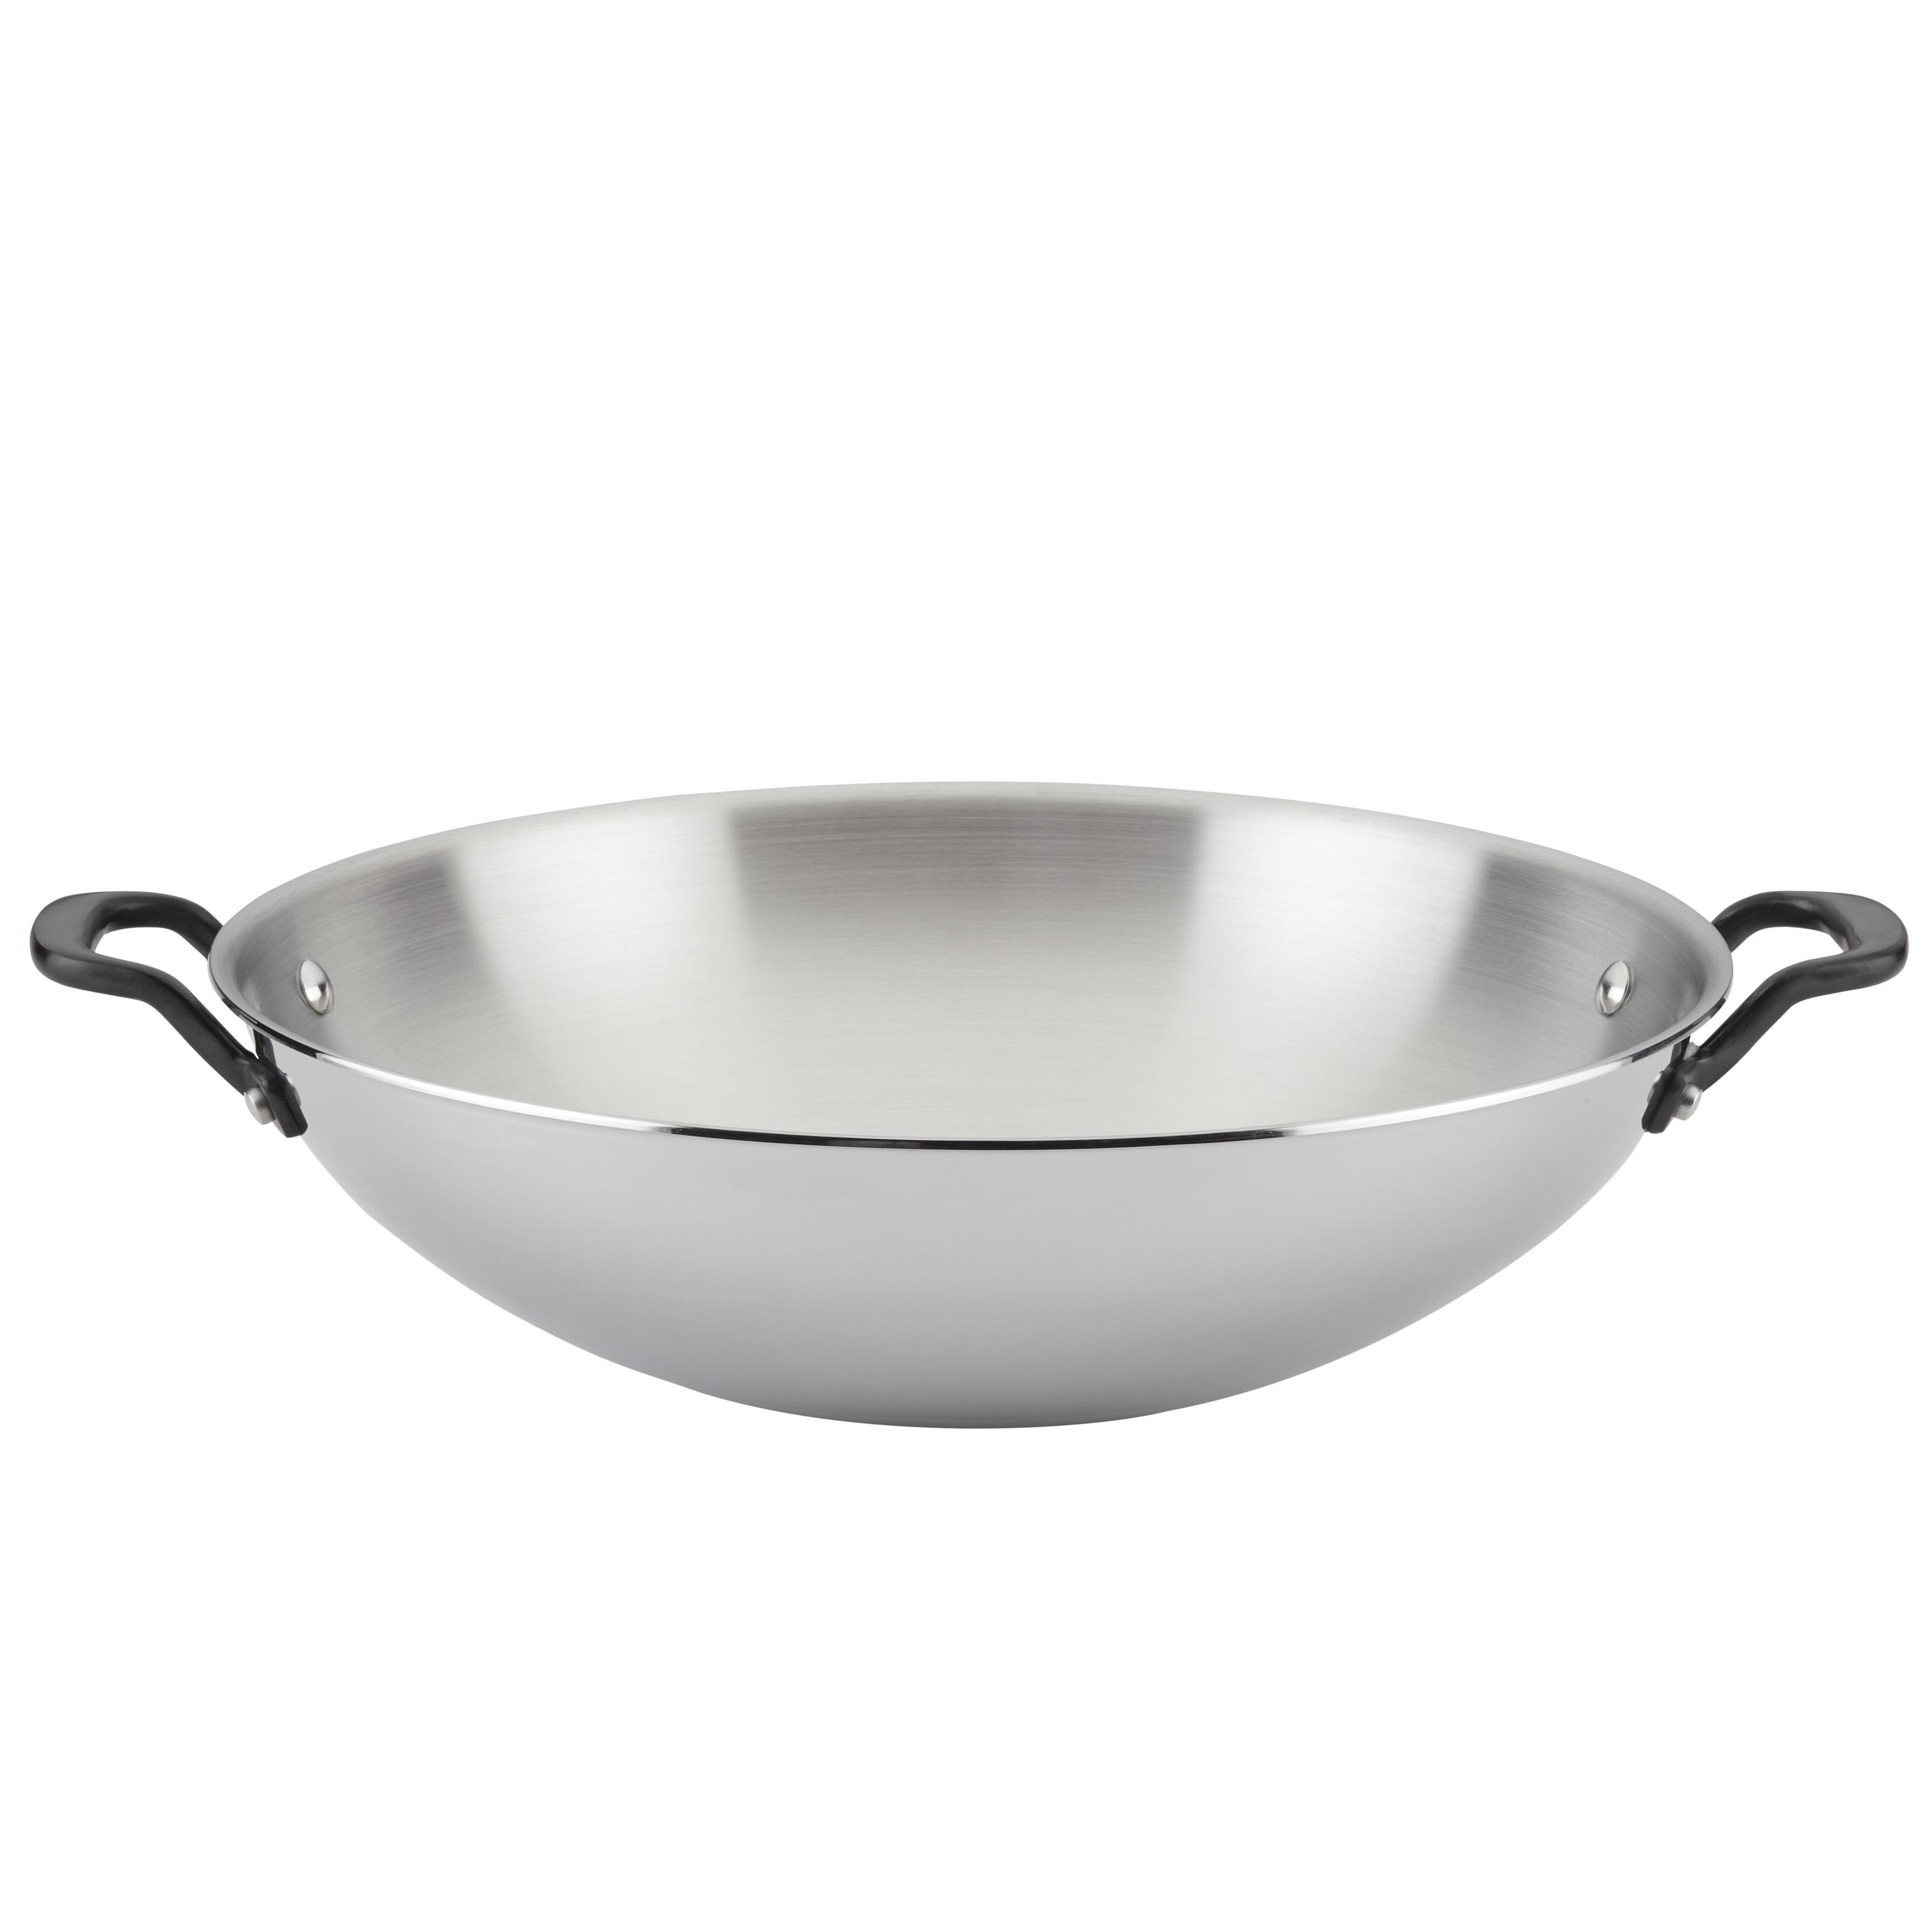 https://ak1.ostkcdn.com/images/products/is/images/direct/62016f14362edd75f899db1c286f6ff12bd48c29/KitchenAid-5-Ply-Clad-Stainless-Steel-Wok%2C-15in.jpg